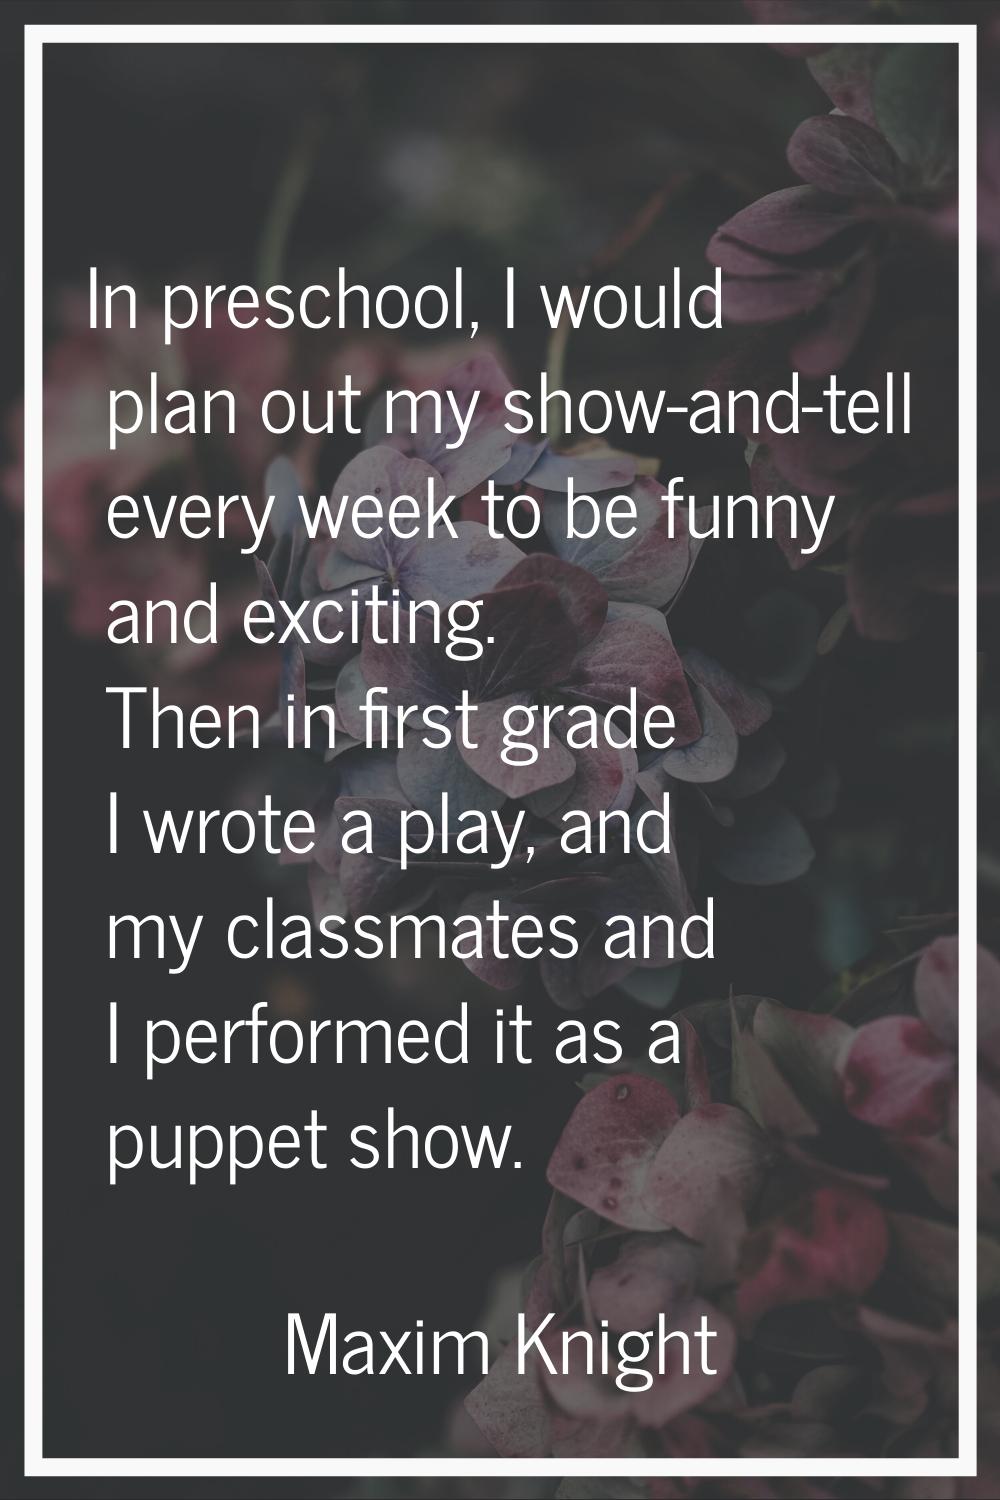 In preschool, I would plan out my show-and-tell every week to be funny and exciting. Then in first 